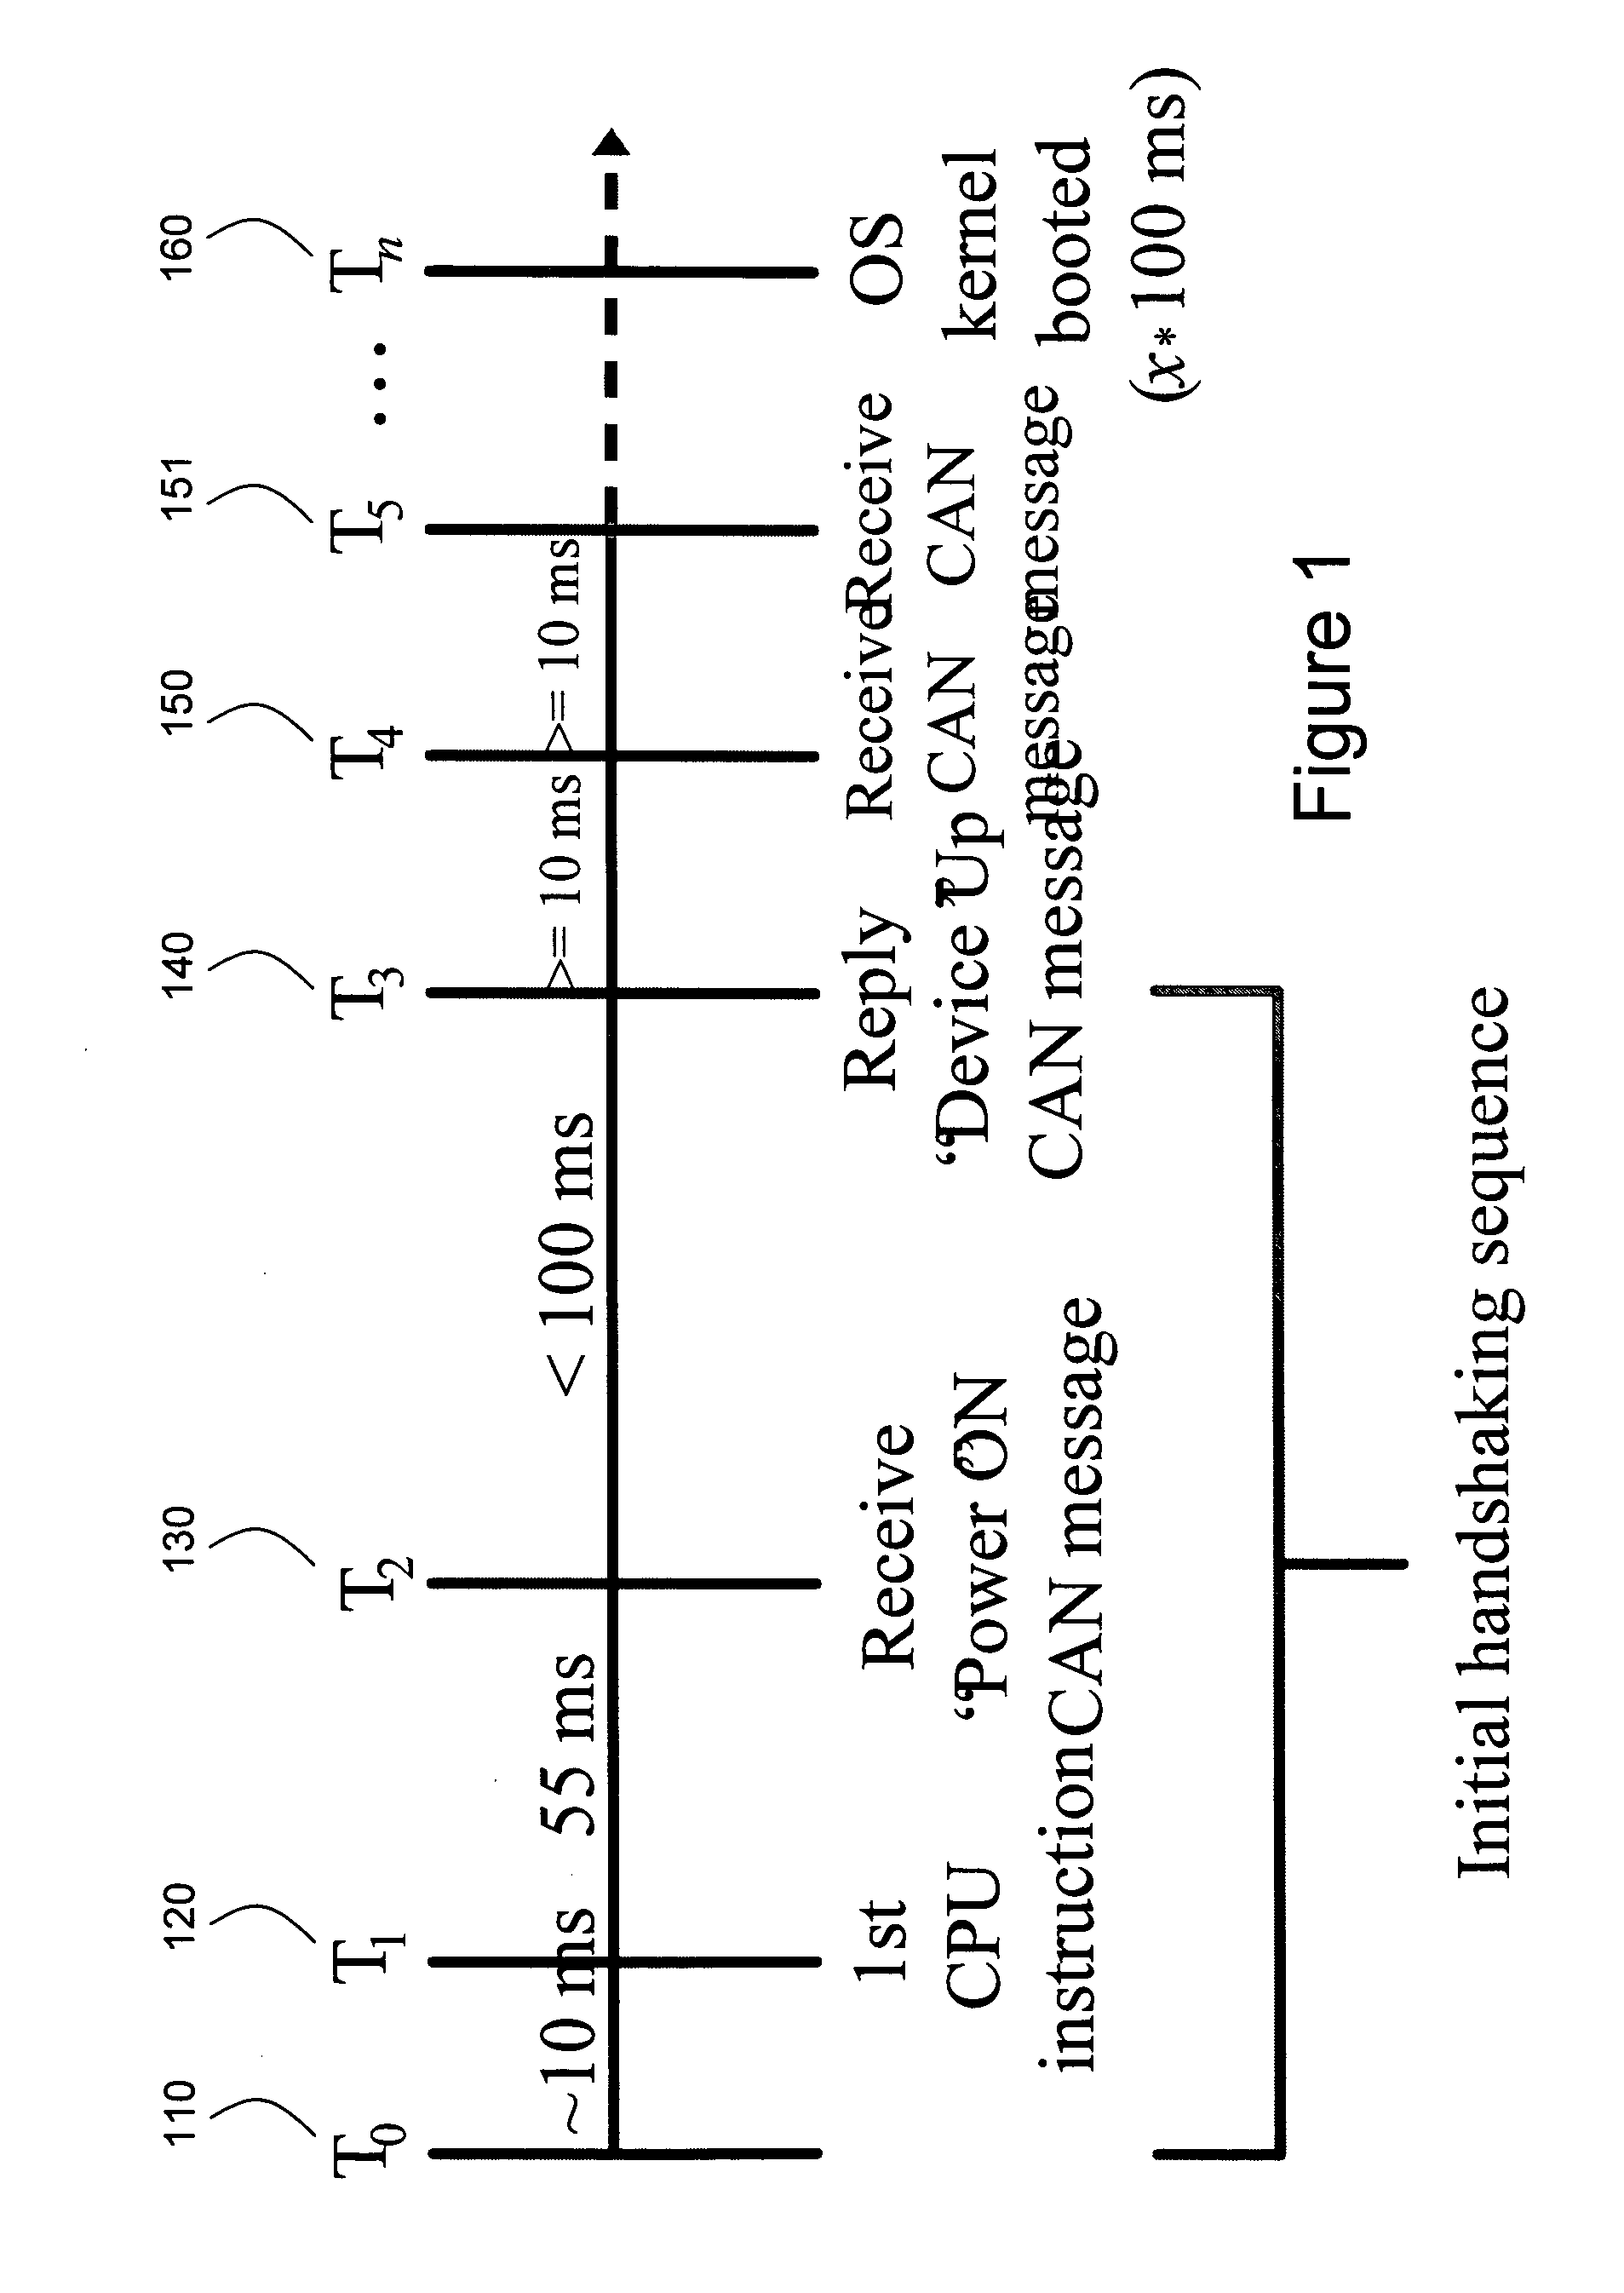 System for executing code during operating system initialization